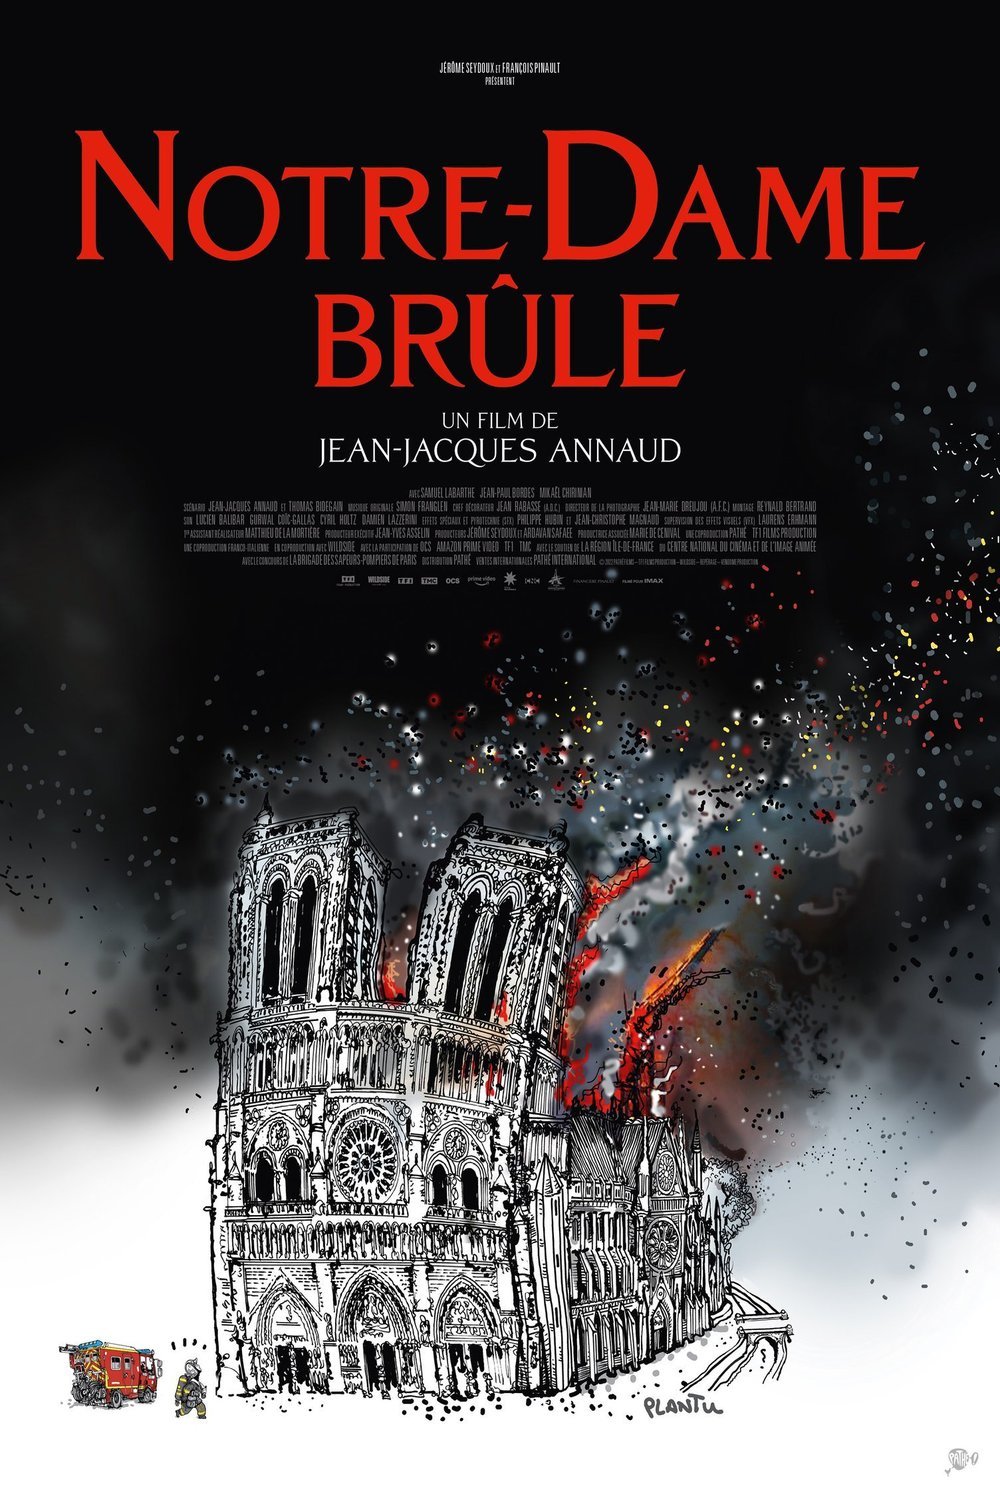 Poster of the movie Notre-Dame brûle